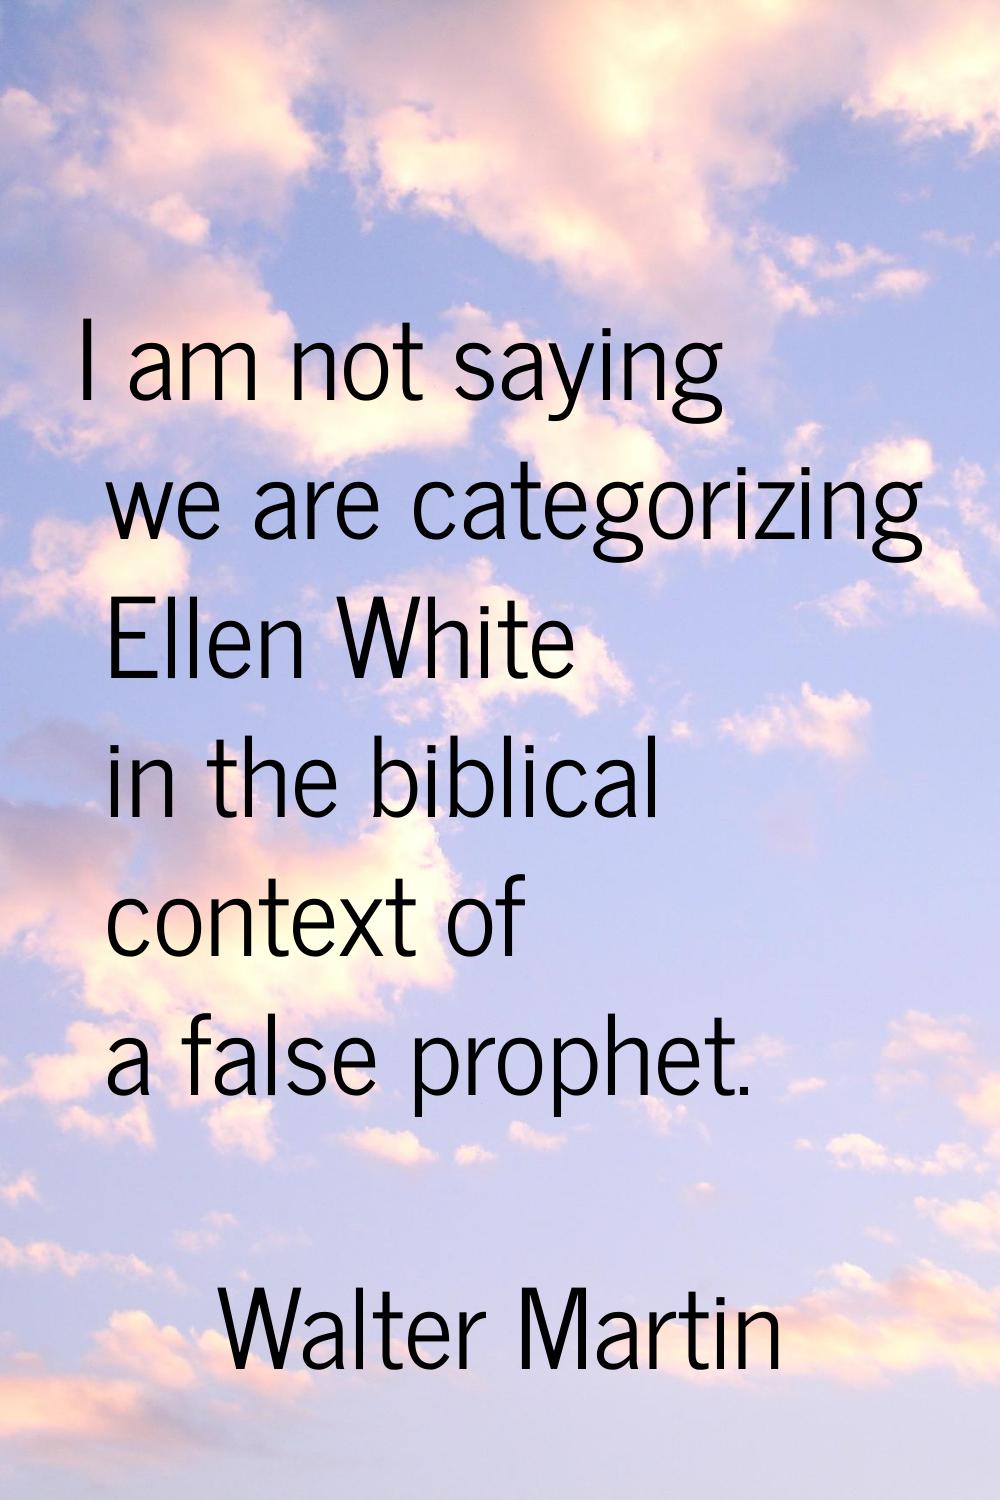 I am not saying we are categorizing Ellen White in the biblical context of a false prophet.